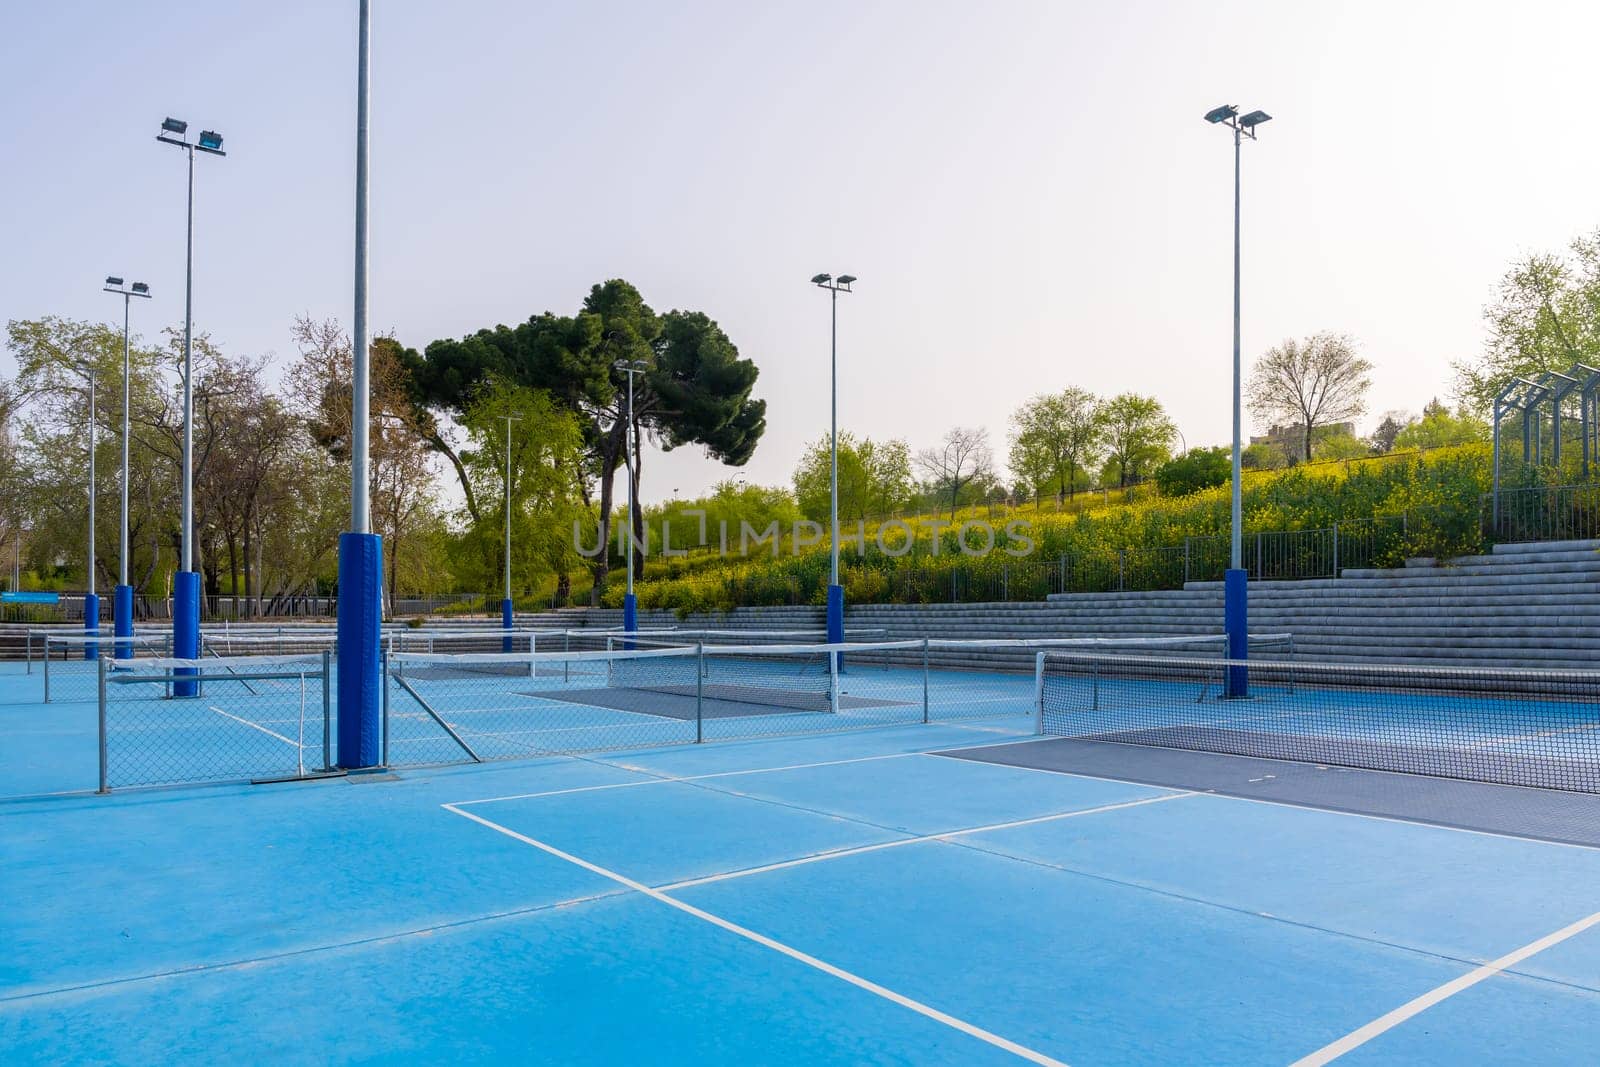 Empty space of a sportive facility with several pickleball outdoors courts